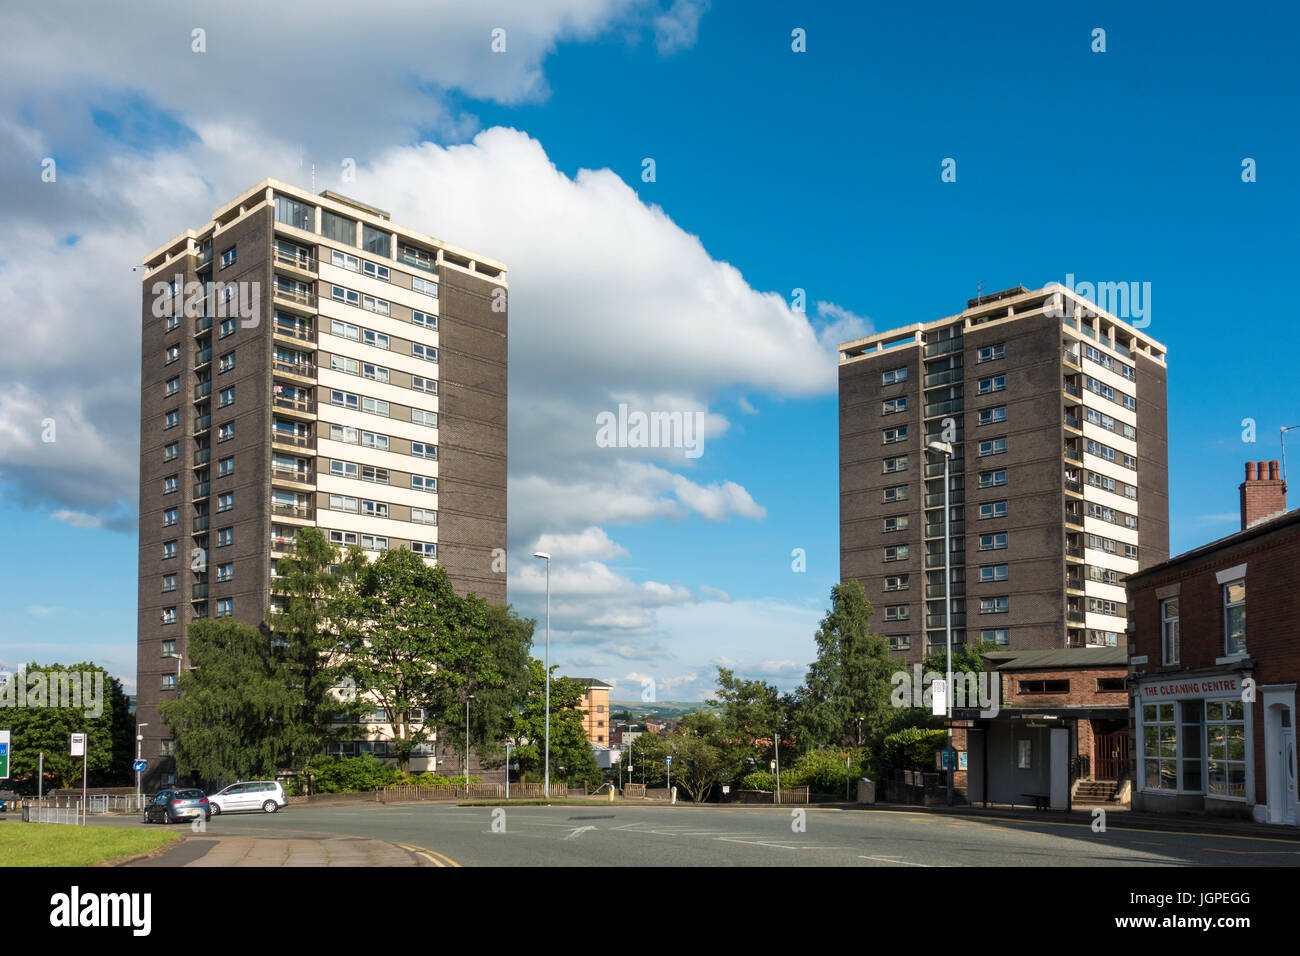 High rise blocks of flats in Rochdale, Lancashire. Stock Photo